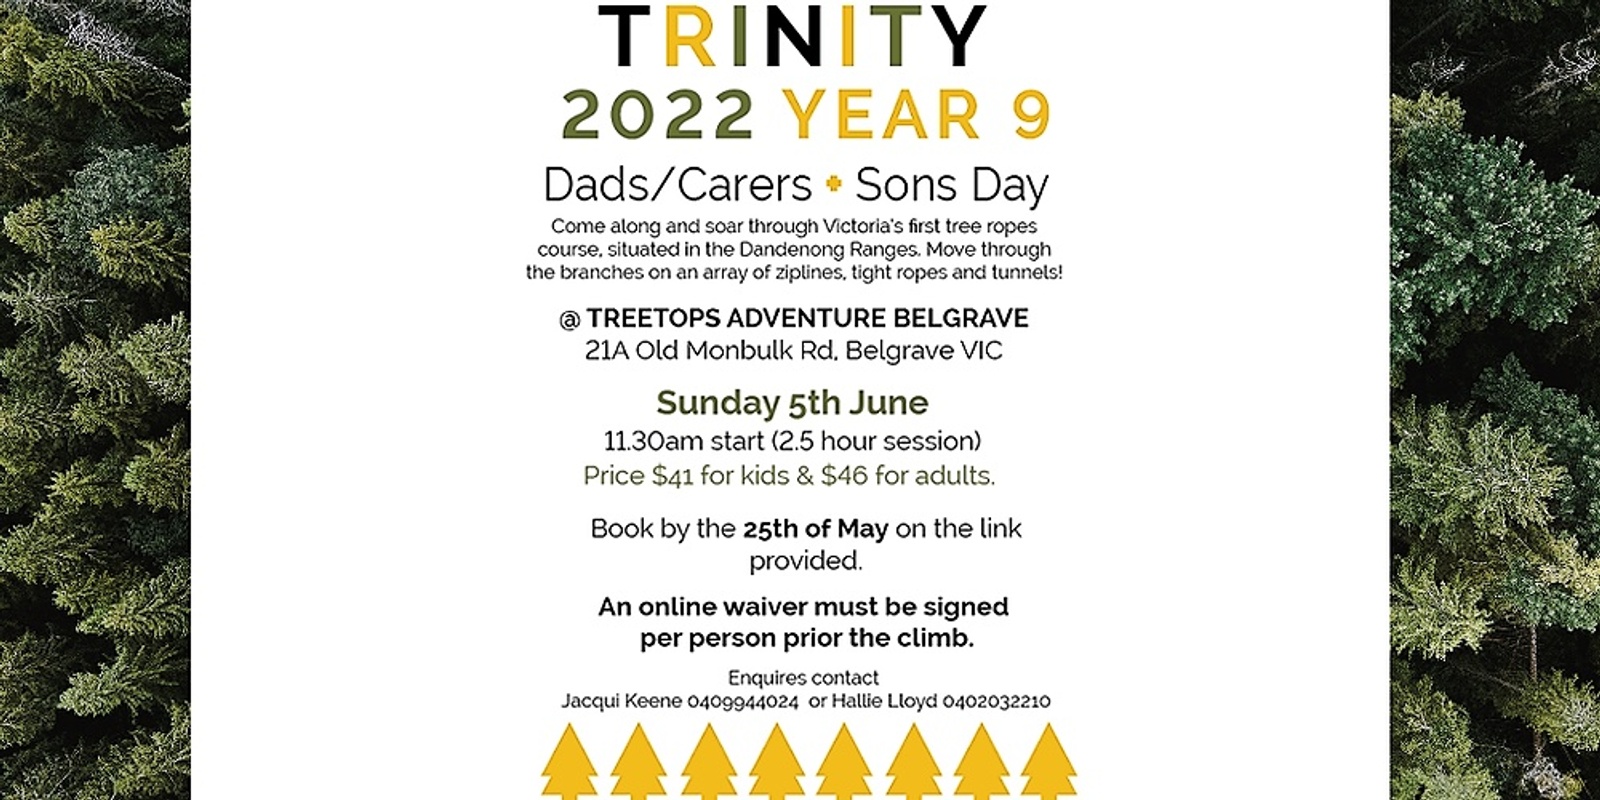 Banner image for Trinity 2022 Year 9 Dads/Carers & Sons Day